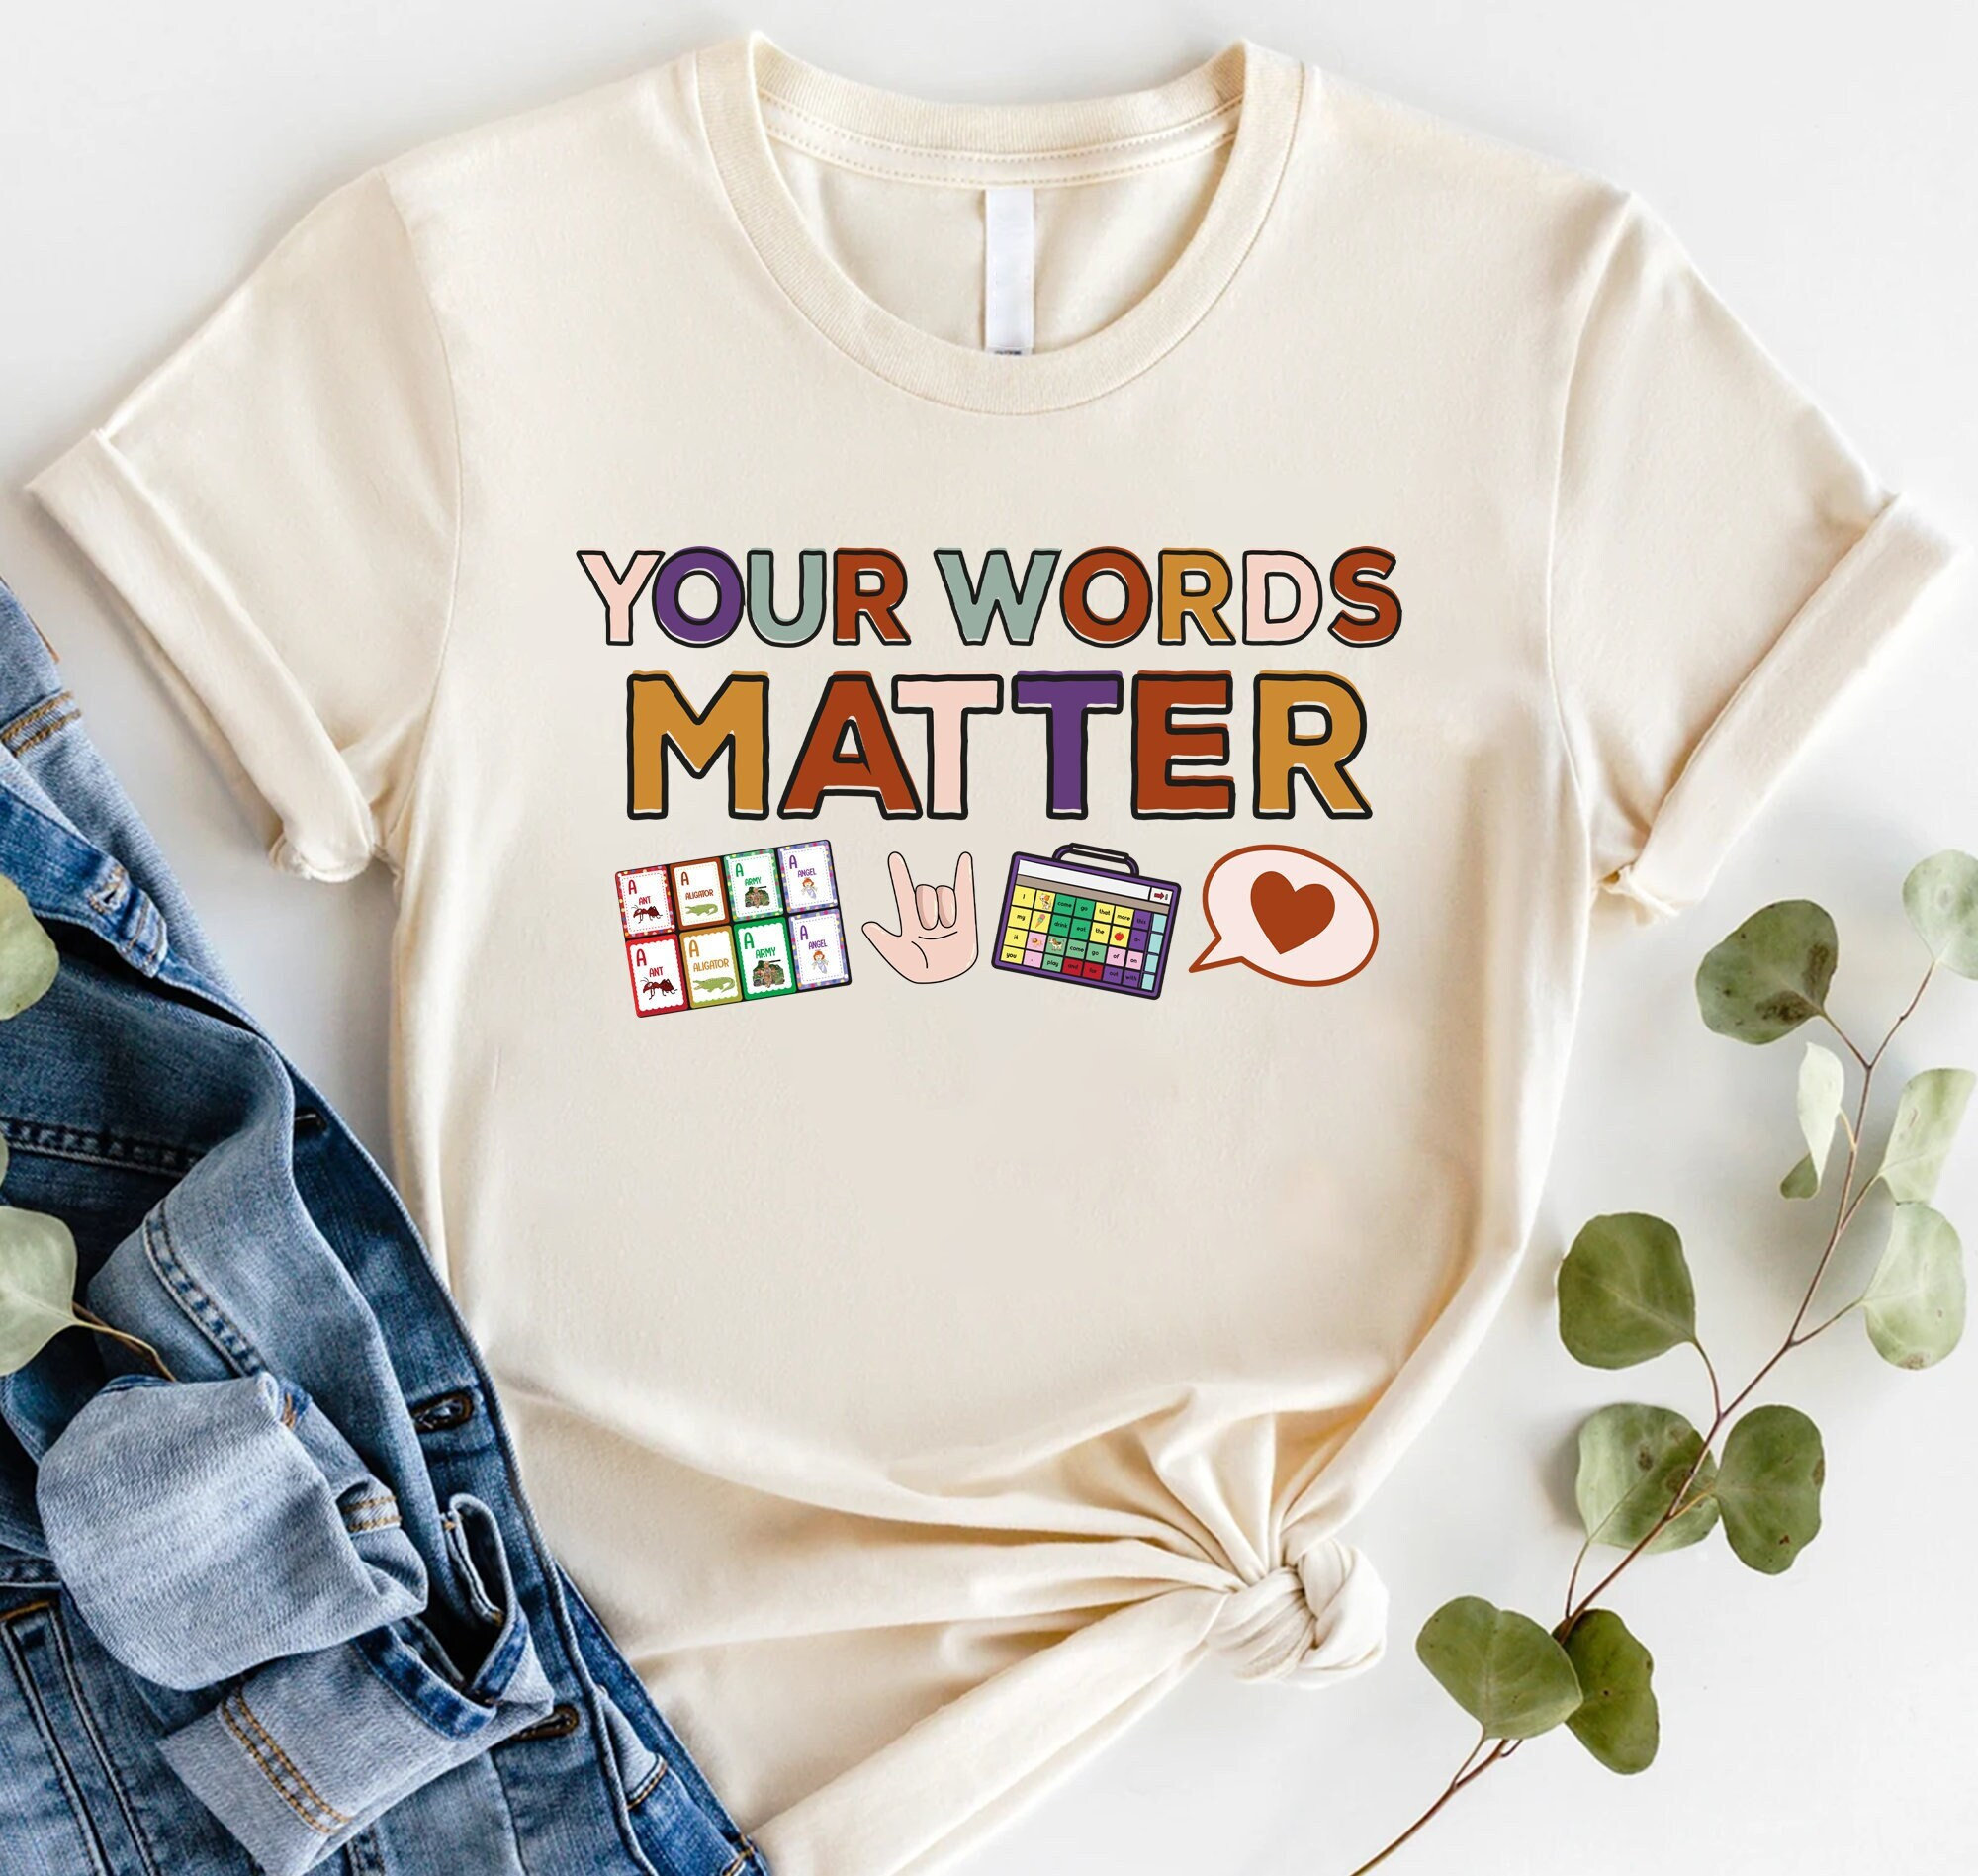 Your Words Matter Shirt AAC SPED Teacher Inclusion Tshirt